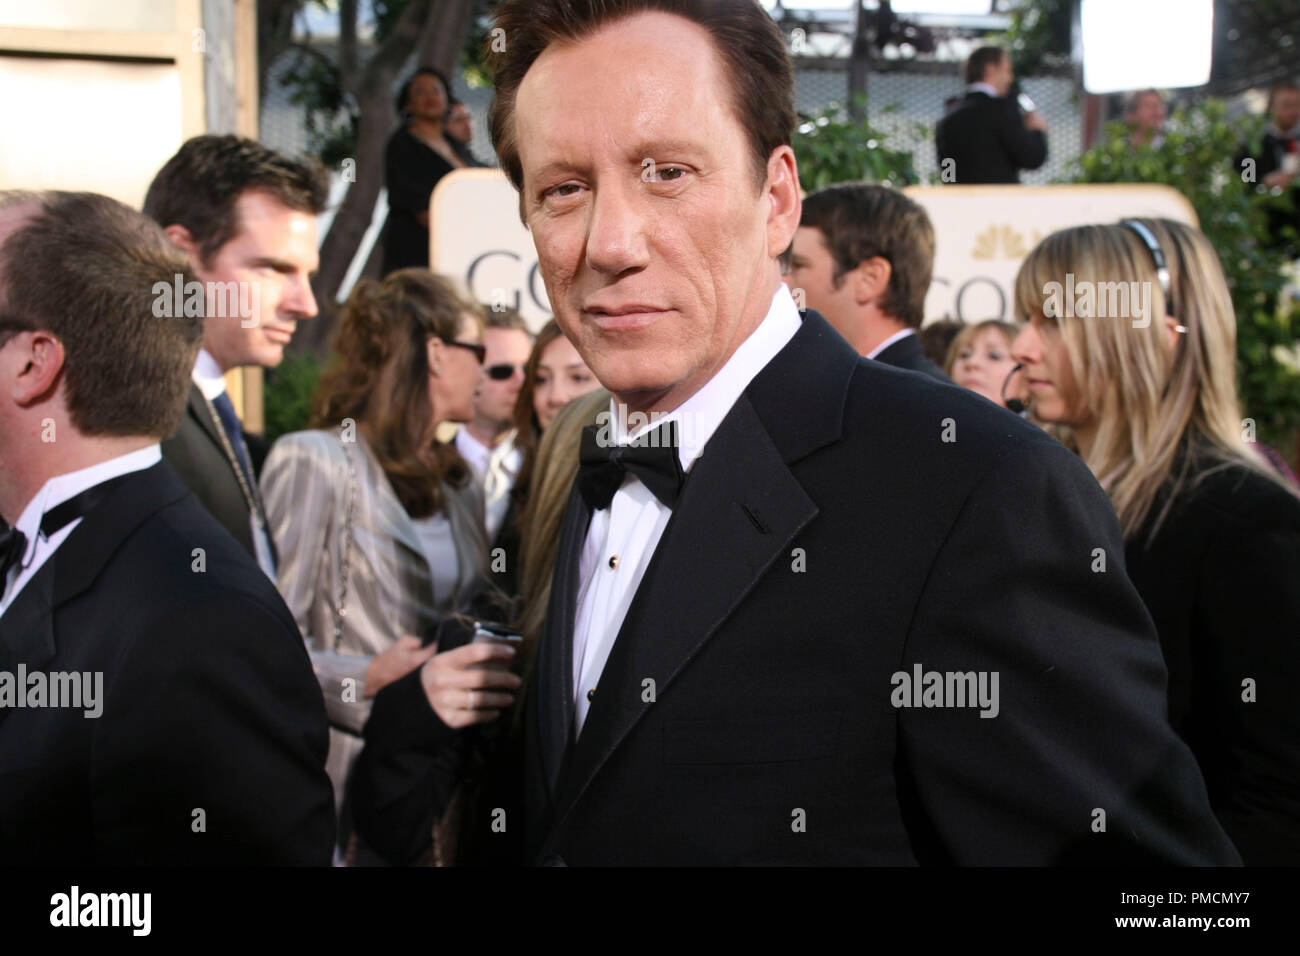 Hollywood Foreign Press Association presenta il 2007 'Golden Globe Awards - 64th annuale" (arrivi) James Woods 1-15-07 Foto Stock